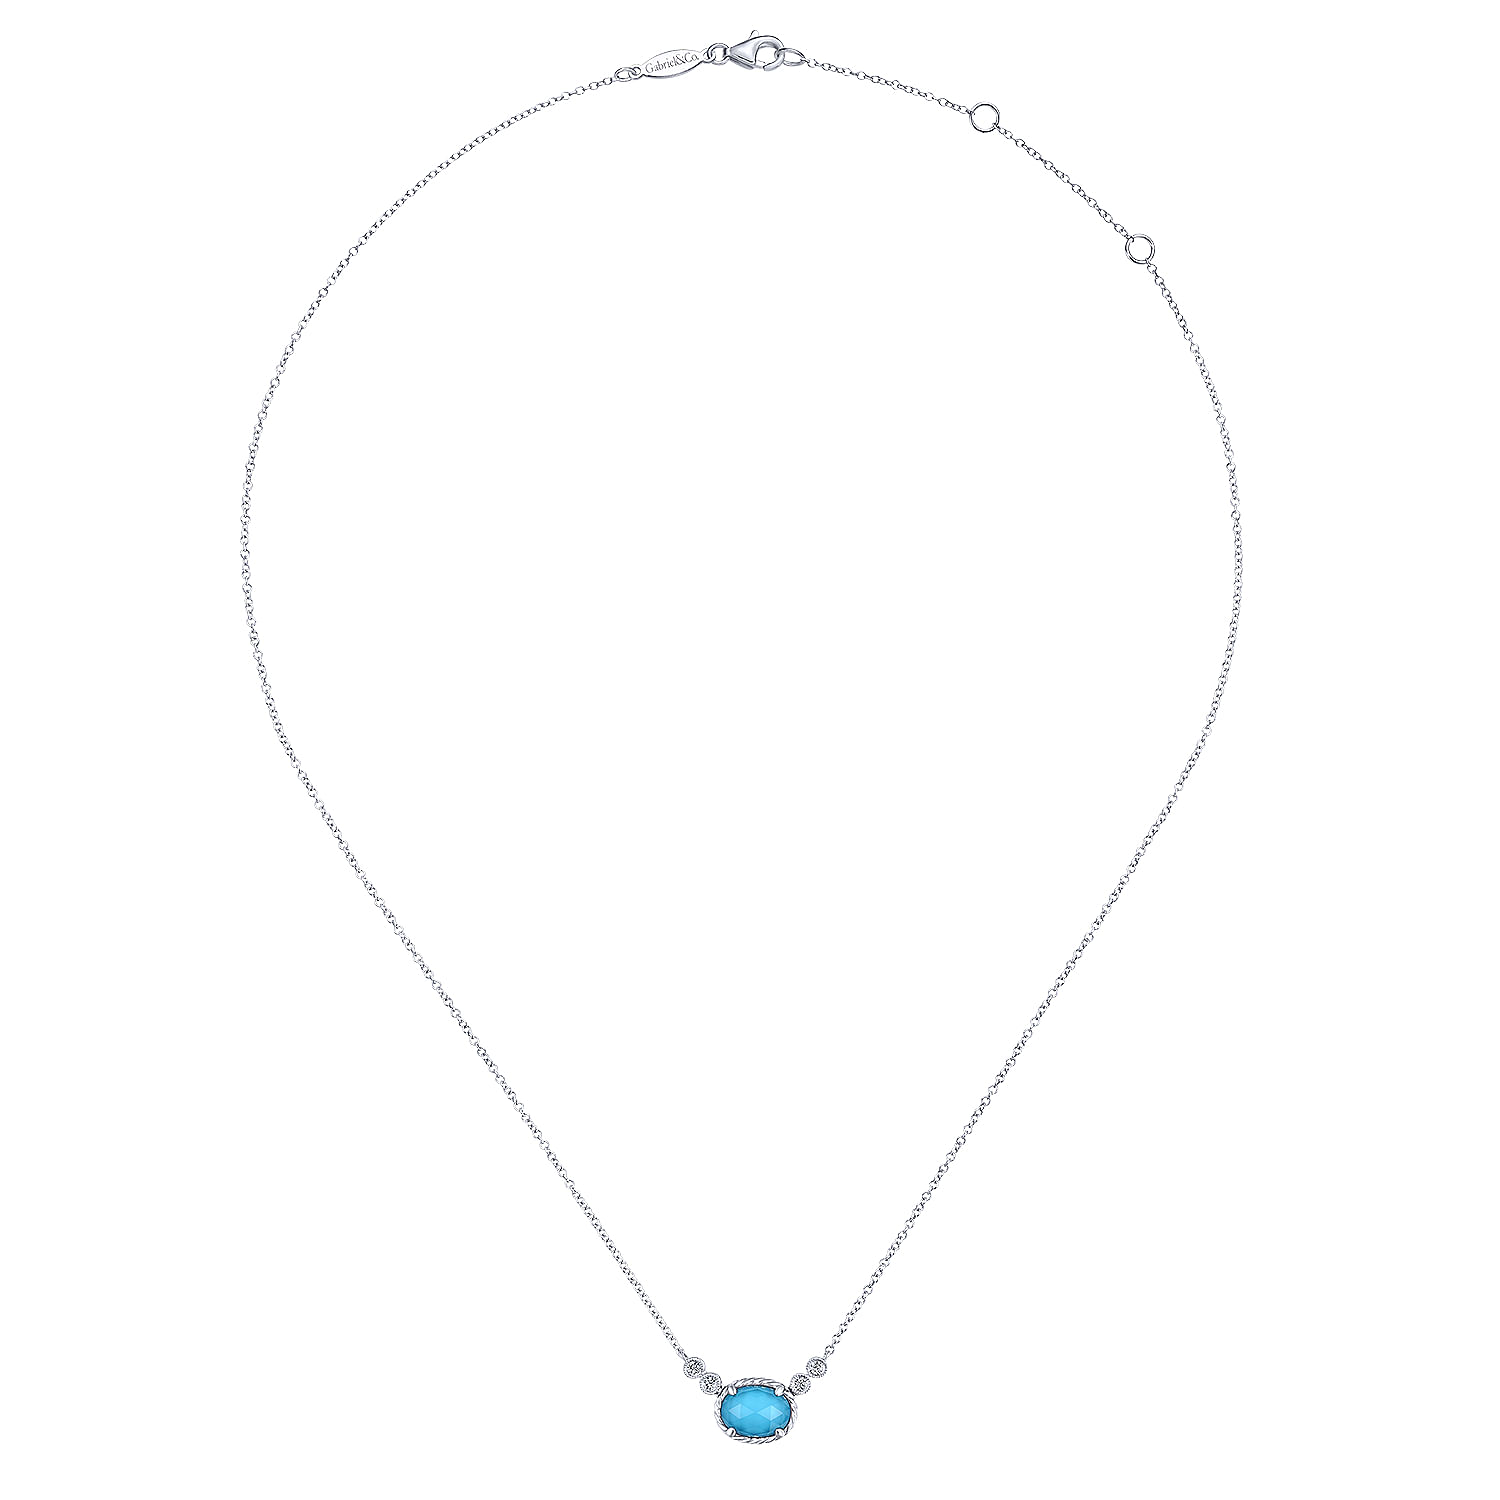 14K White Gold Oval Rock Crystal/Turquoise and Diamond Pendant Necklace